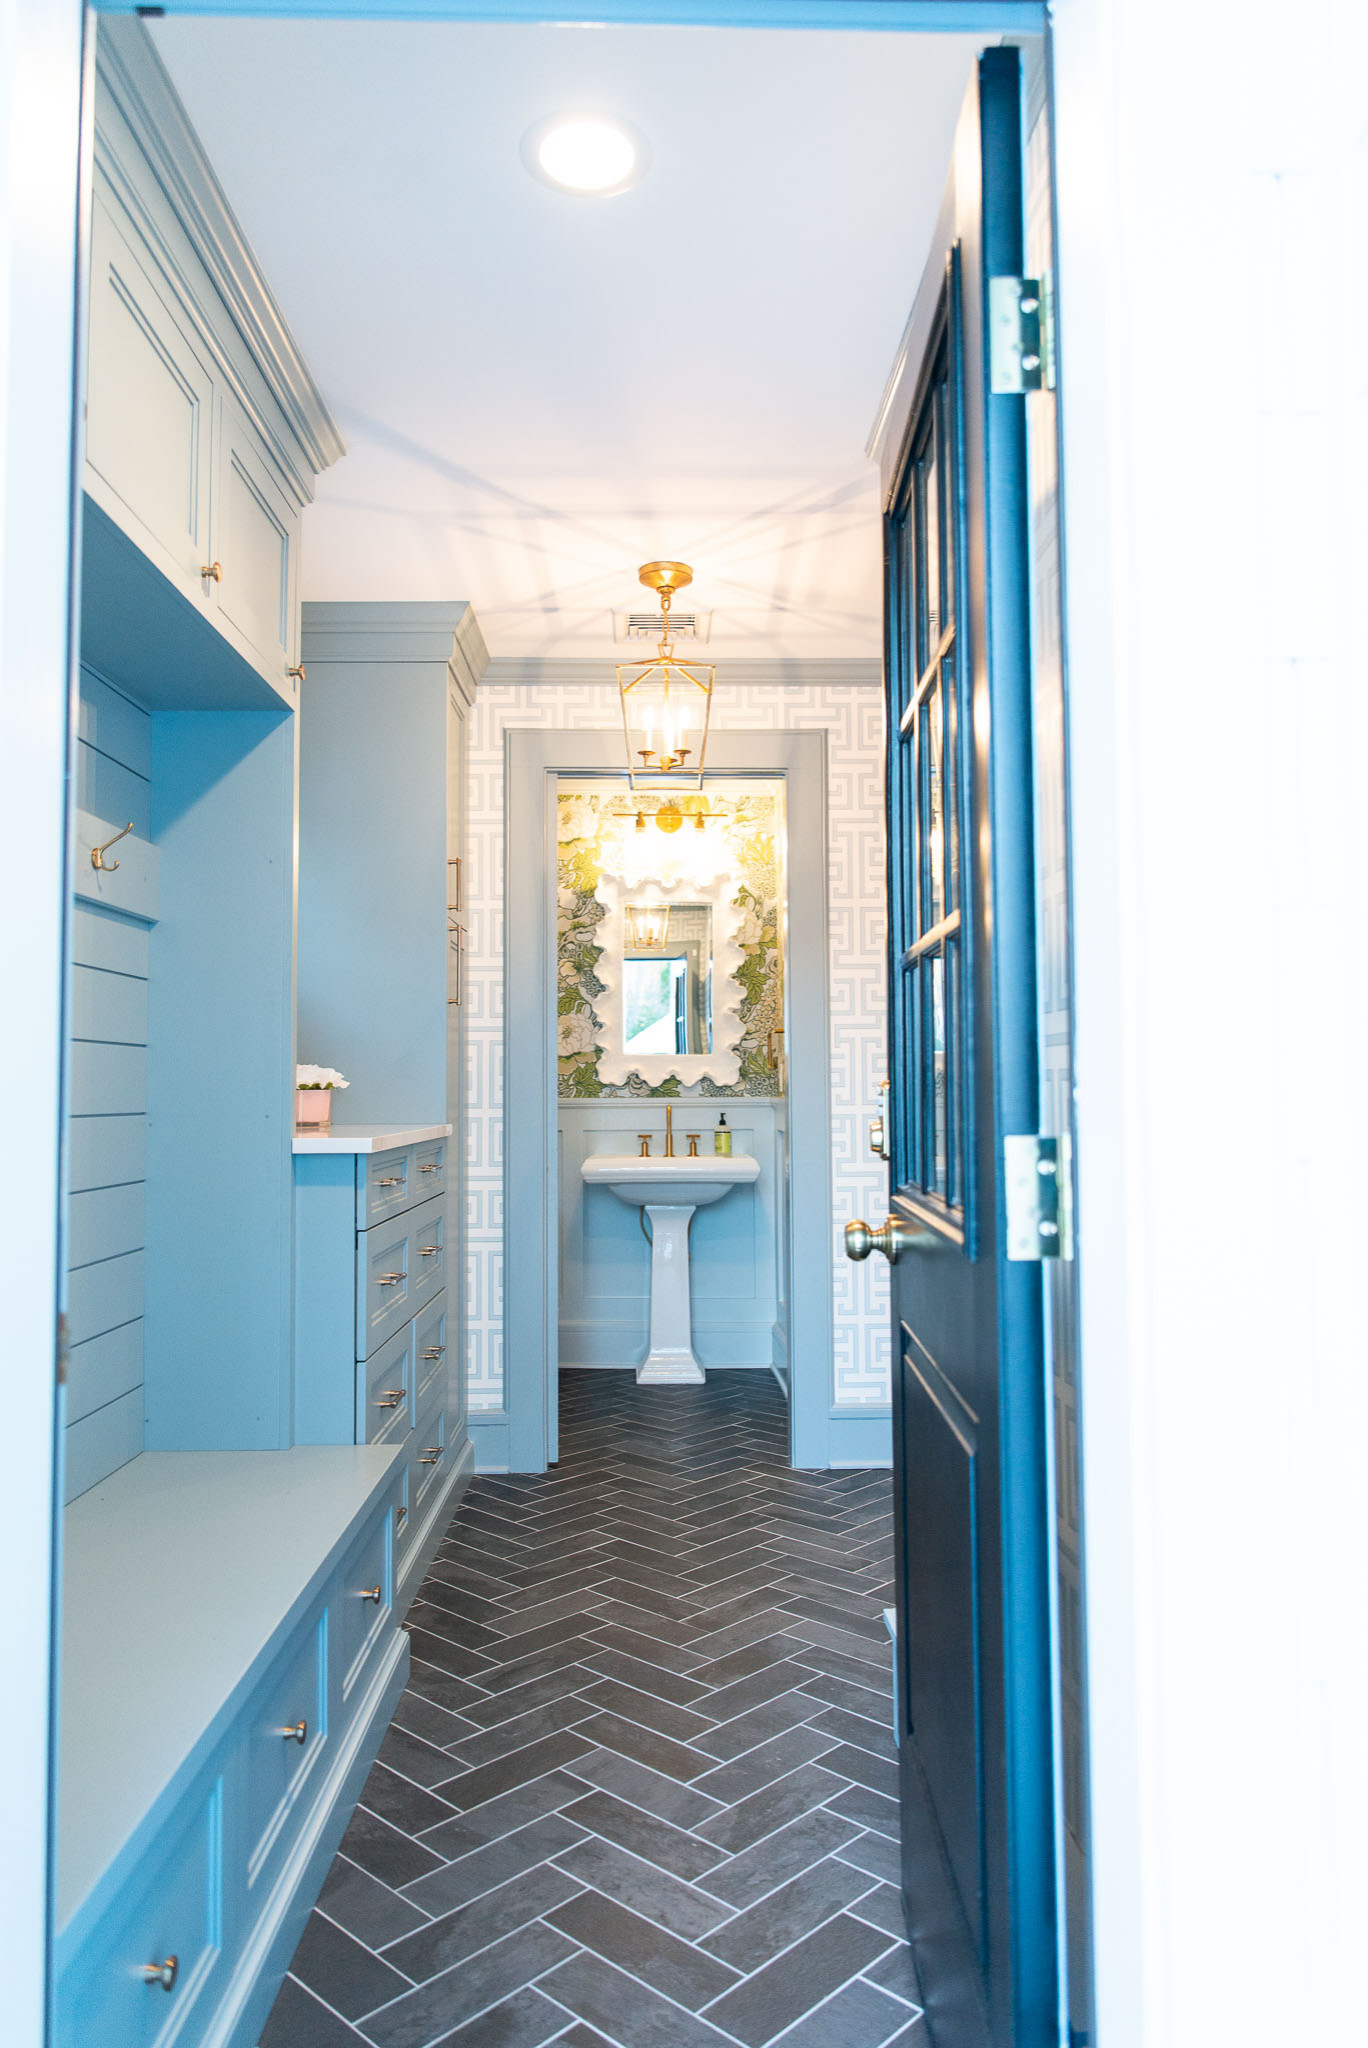 75 Wallpaper Entryway with Blue Walls Ideas You'll Love - March, 2023 |  Houzz